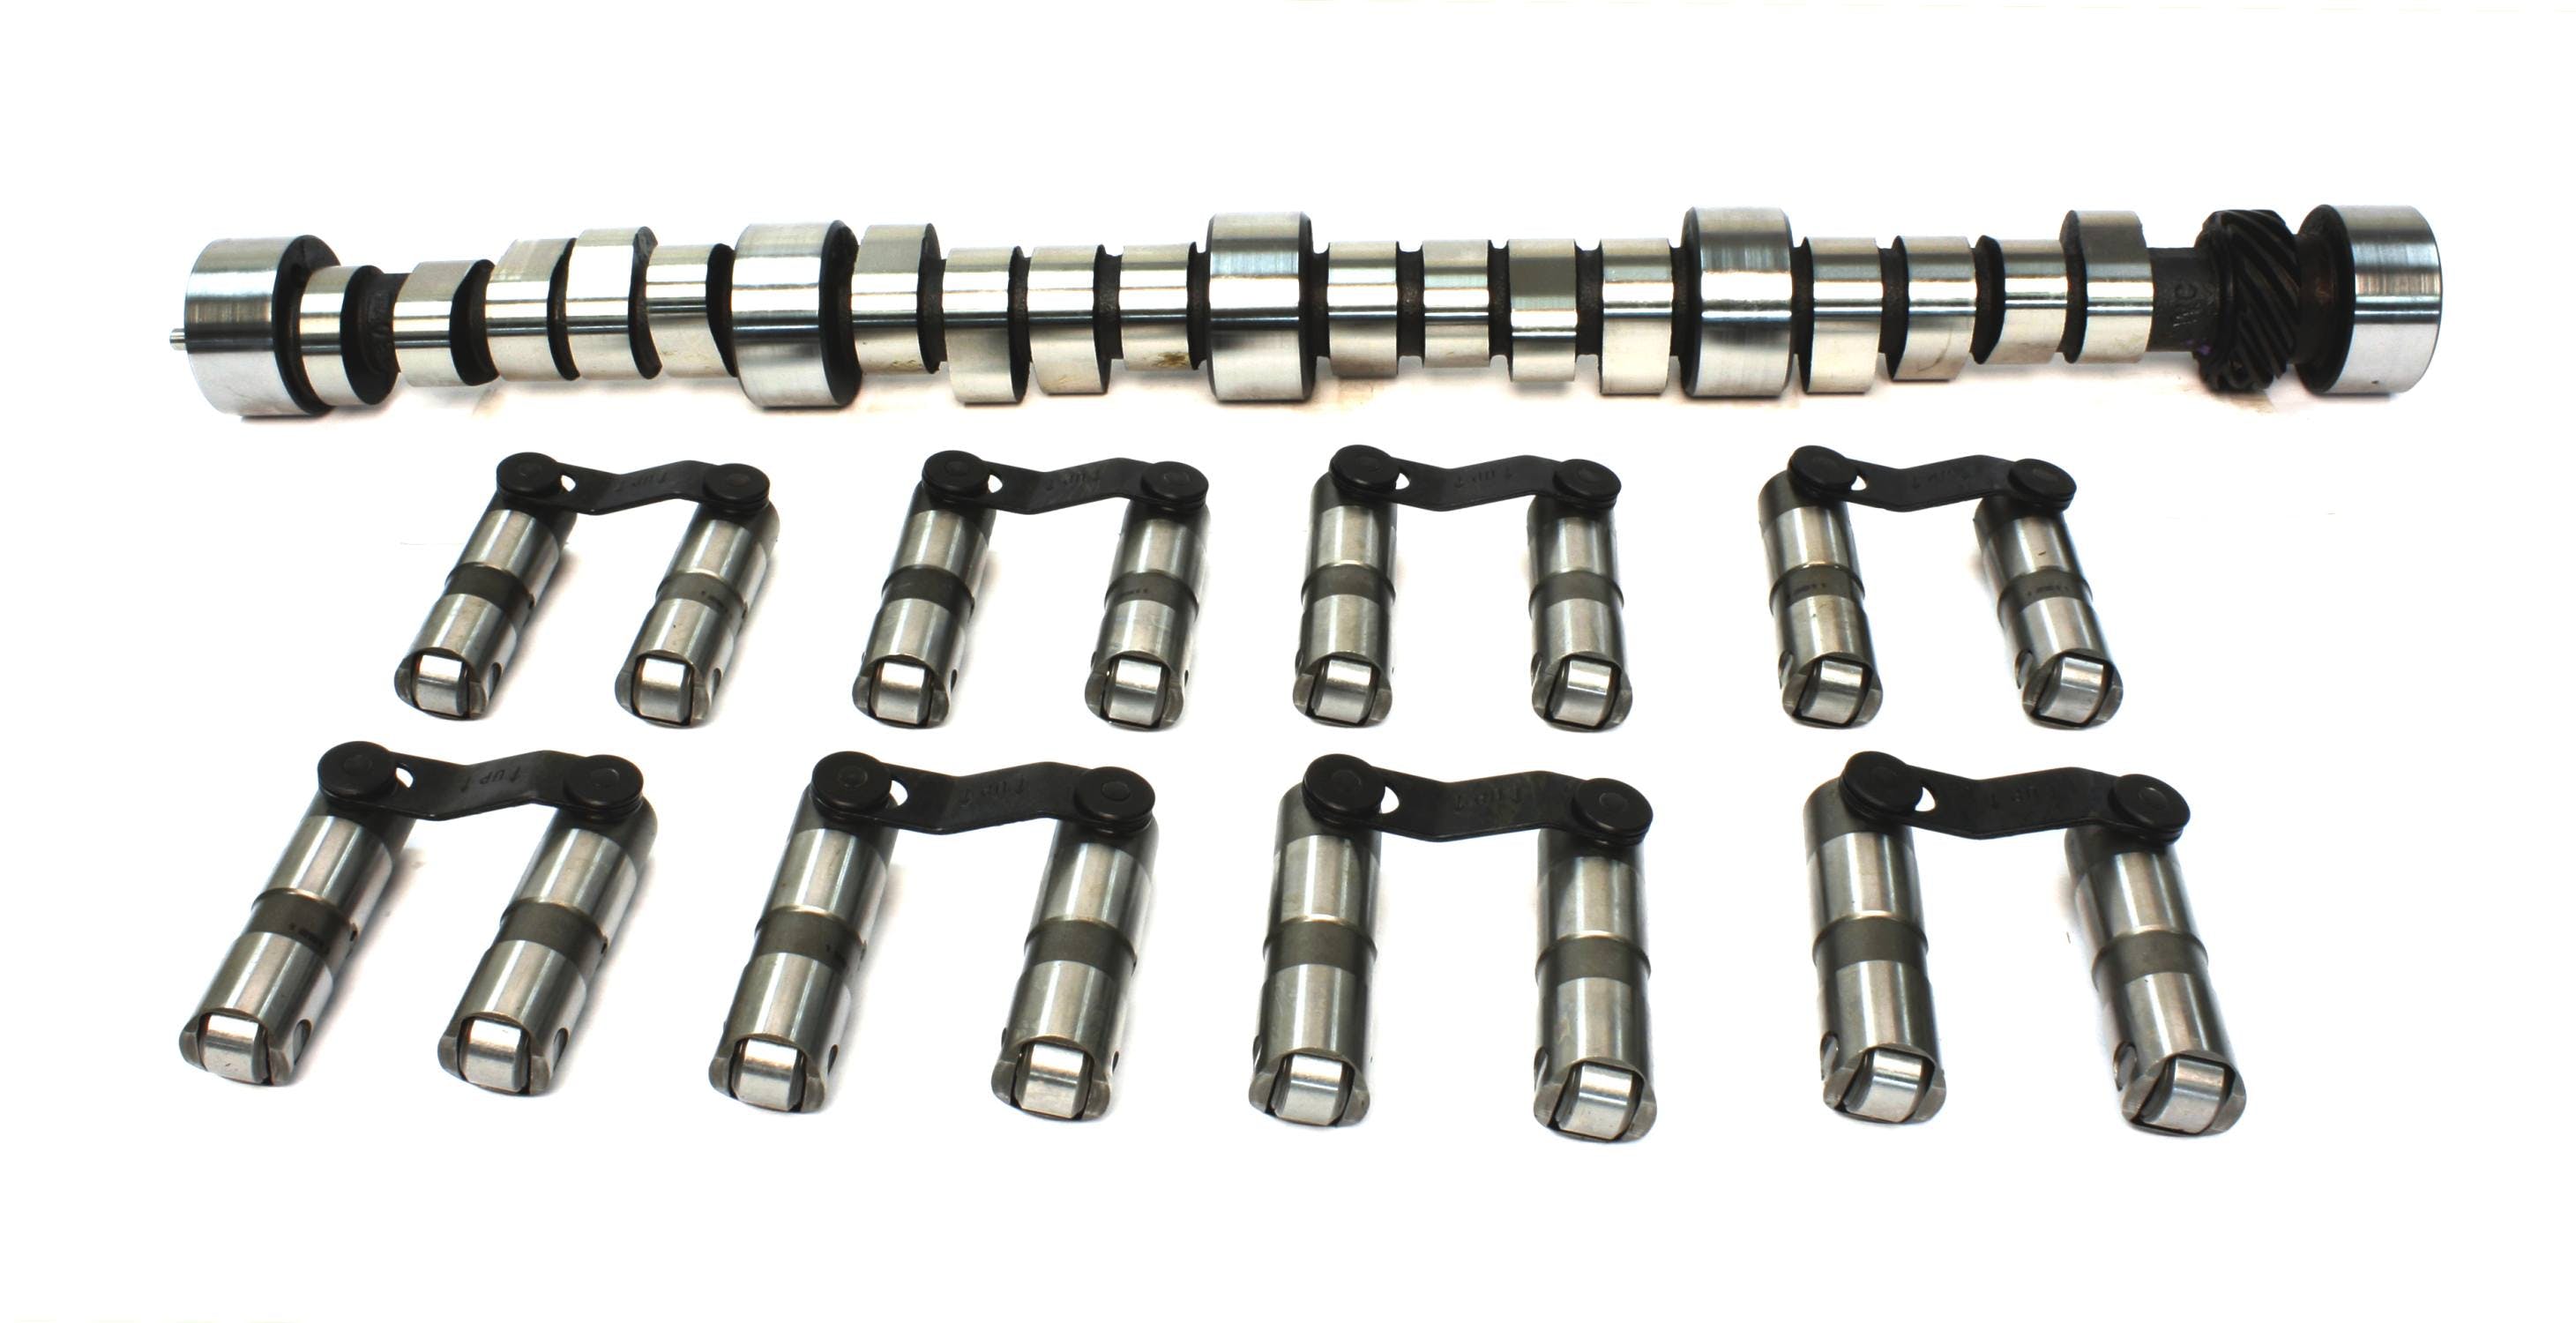 Competition Cams CL11-412-8 COMPUTER CONTROL 210/220 HYD ROLLER CAM/LIFTER KIT CHEVY BIG BLOCK 396-454